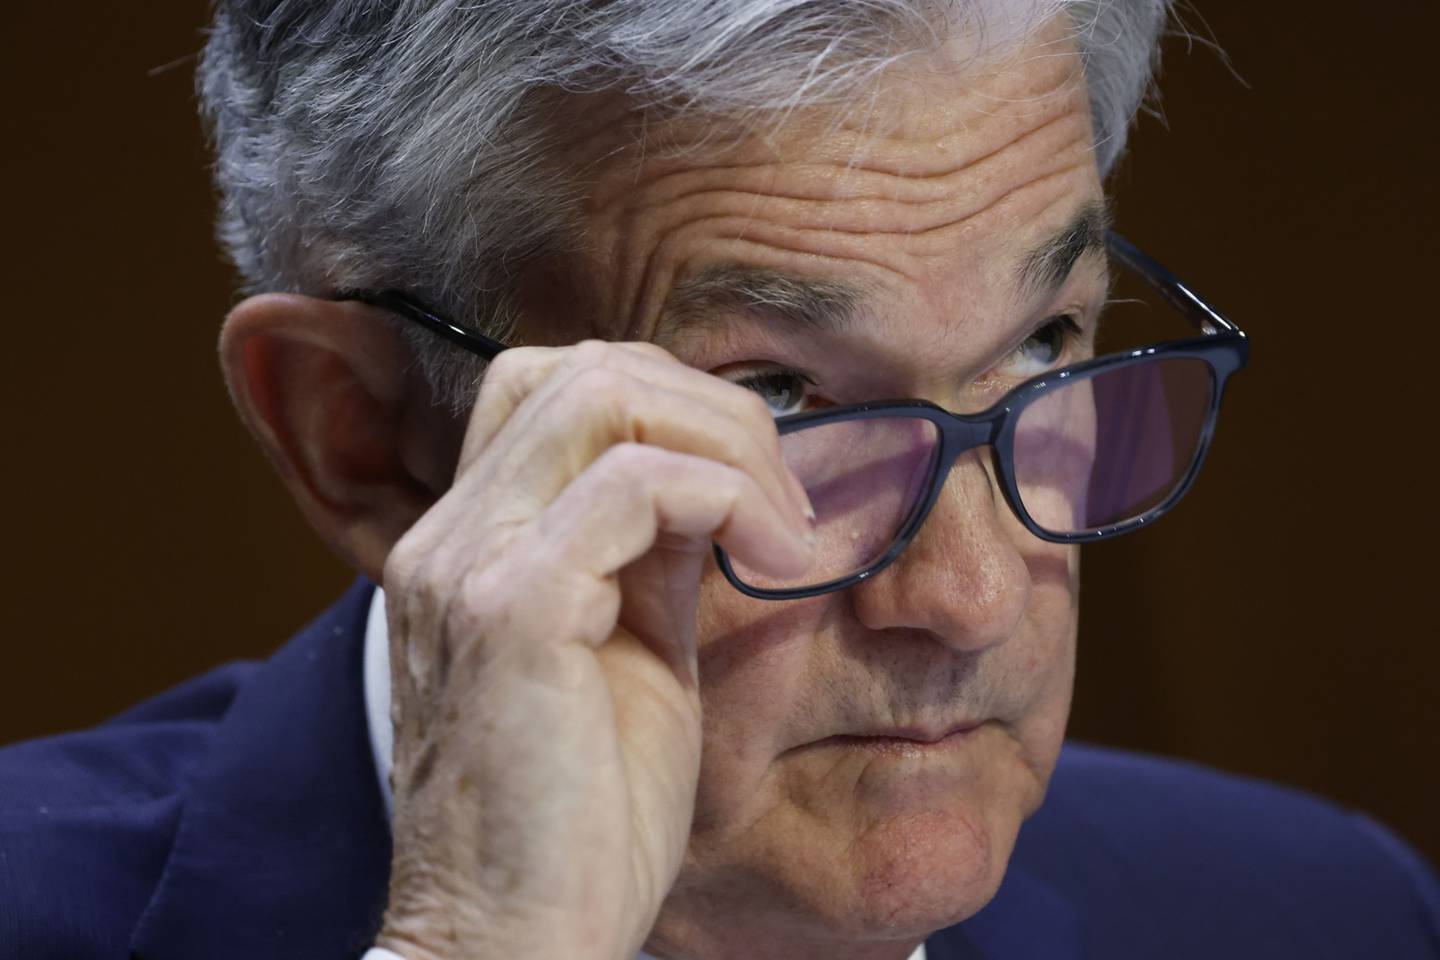 Stocks rallied and Treasury yields fell with the dollar as Jerome Powell said the Federal Reserve will slow the pace of rate increases at one point.